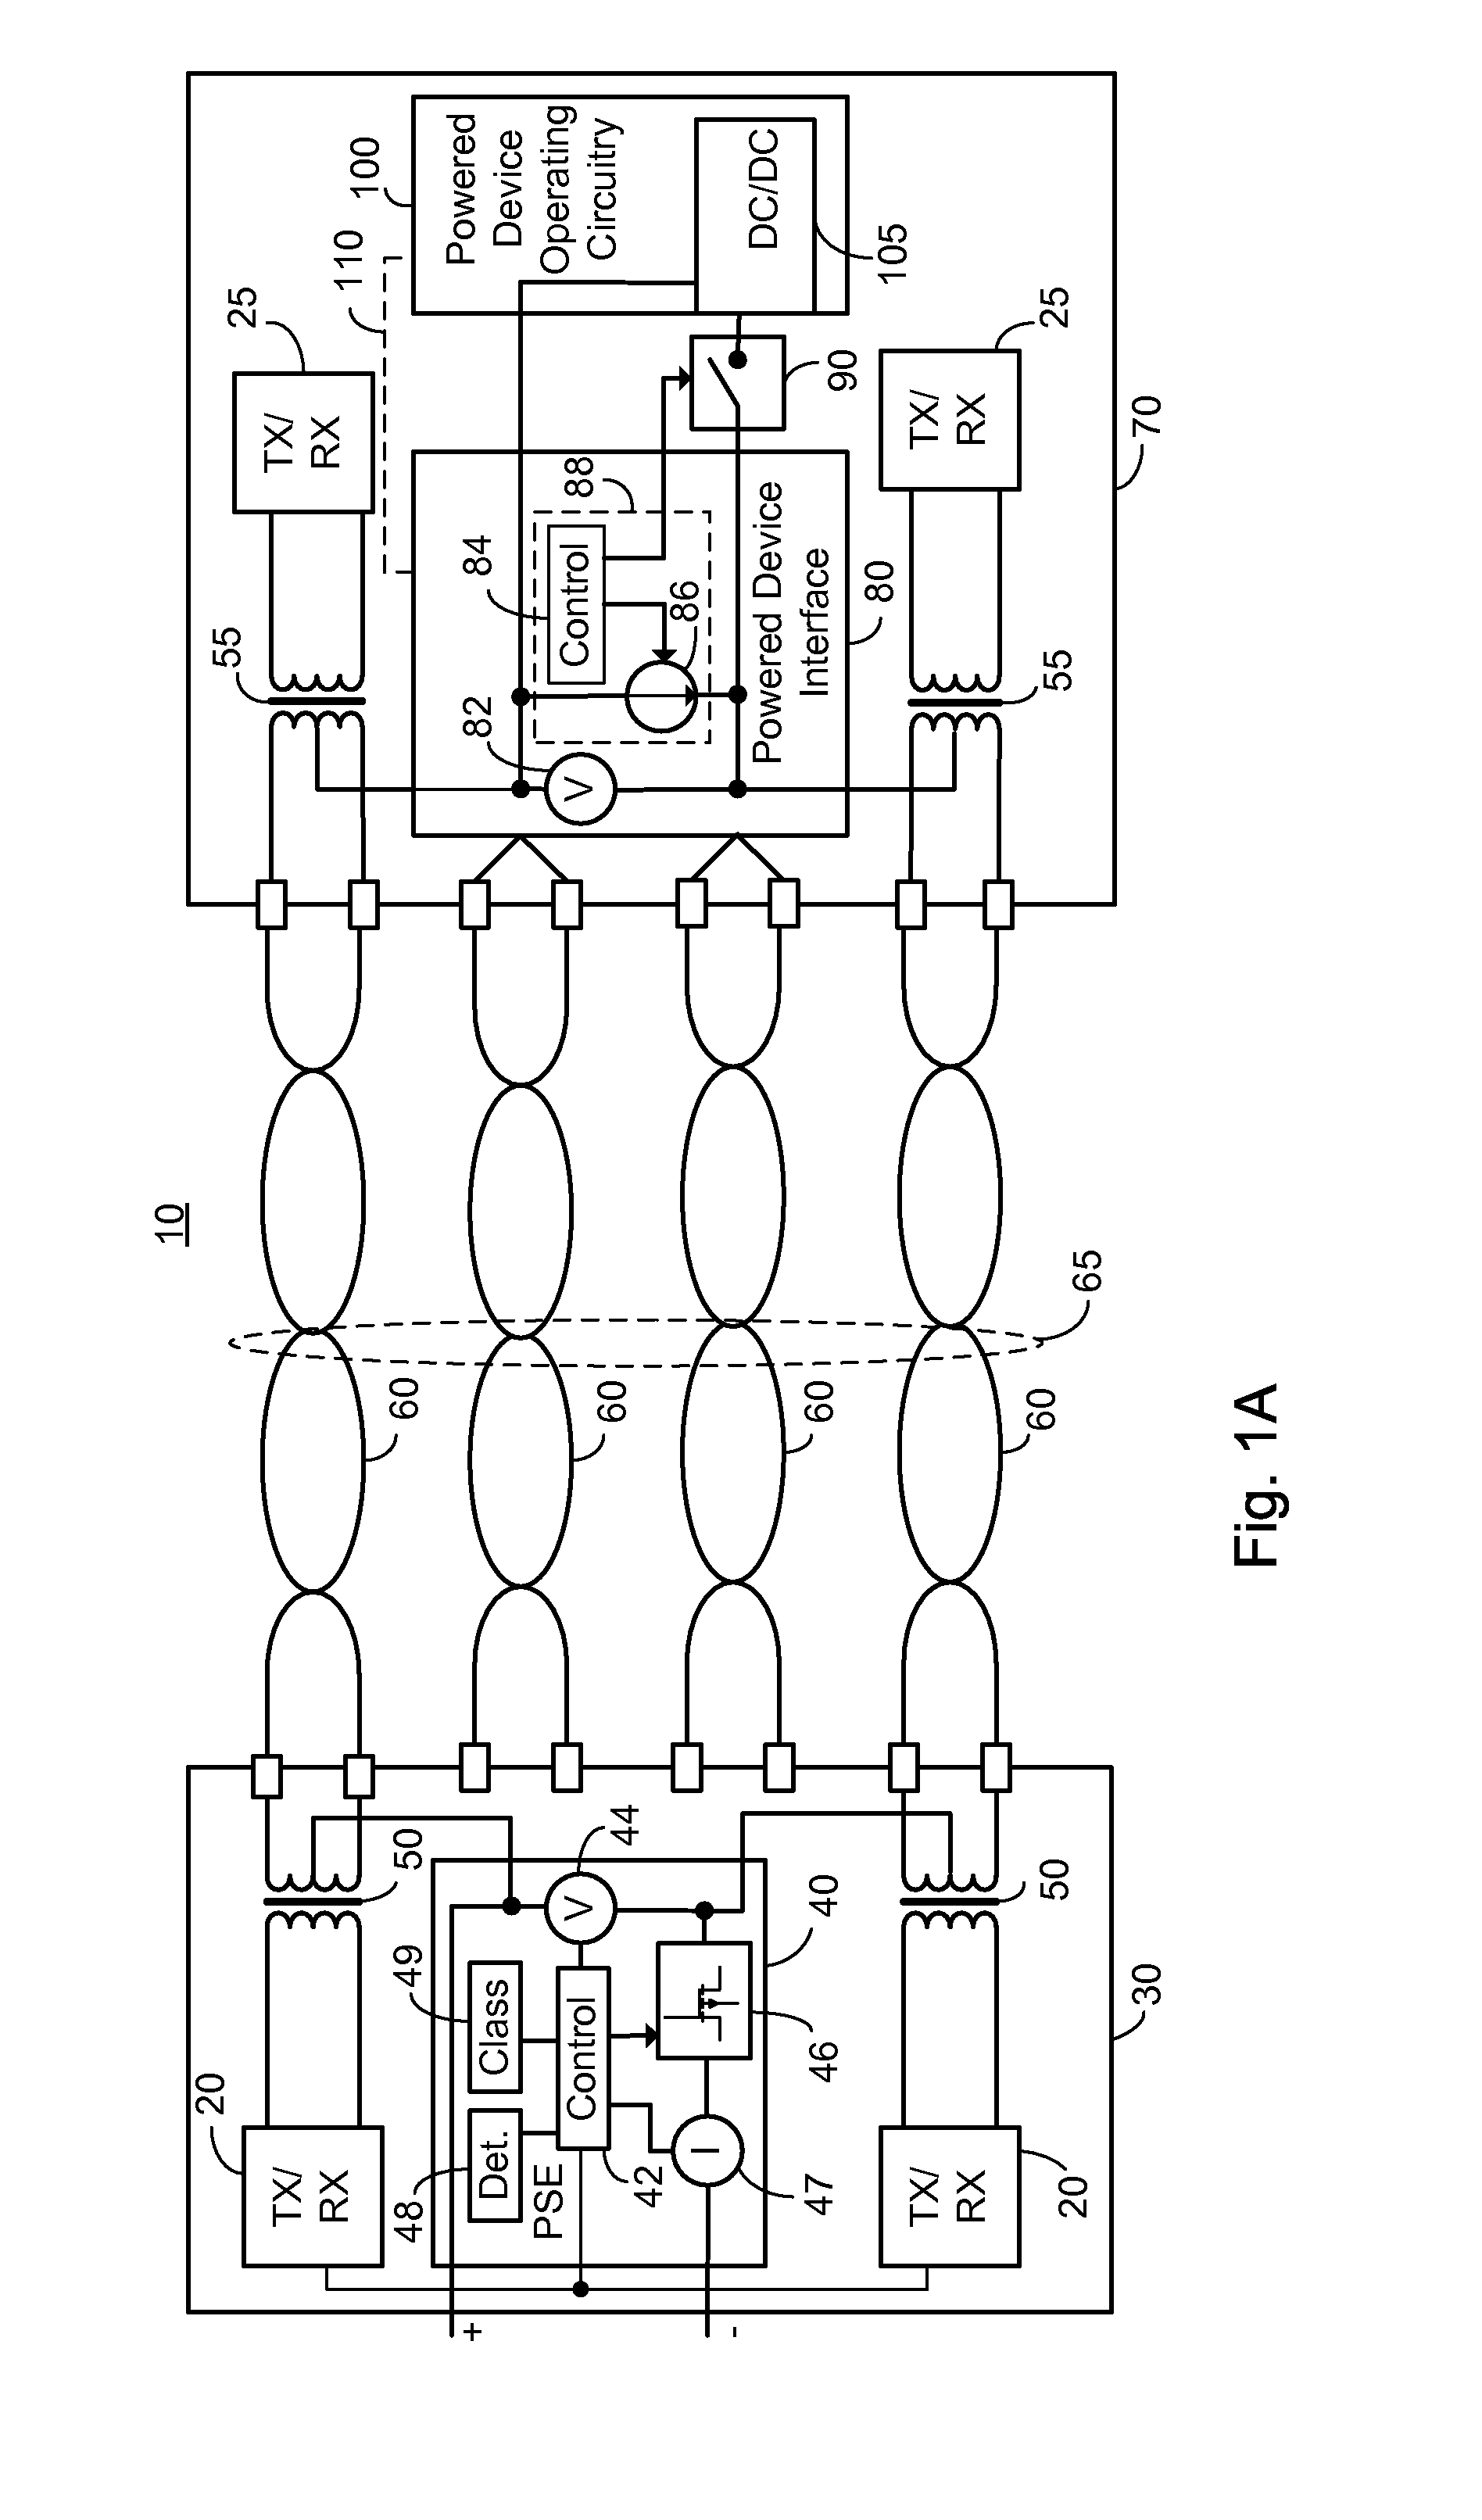 Determination of wire metric for delivery of power to a powered device over communication cabling